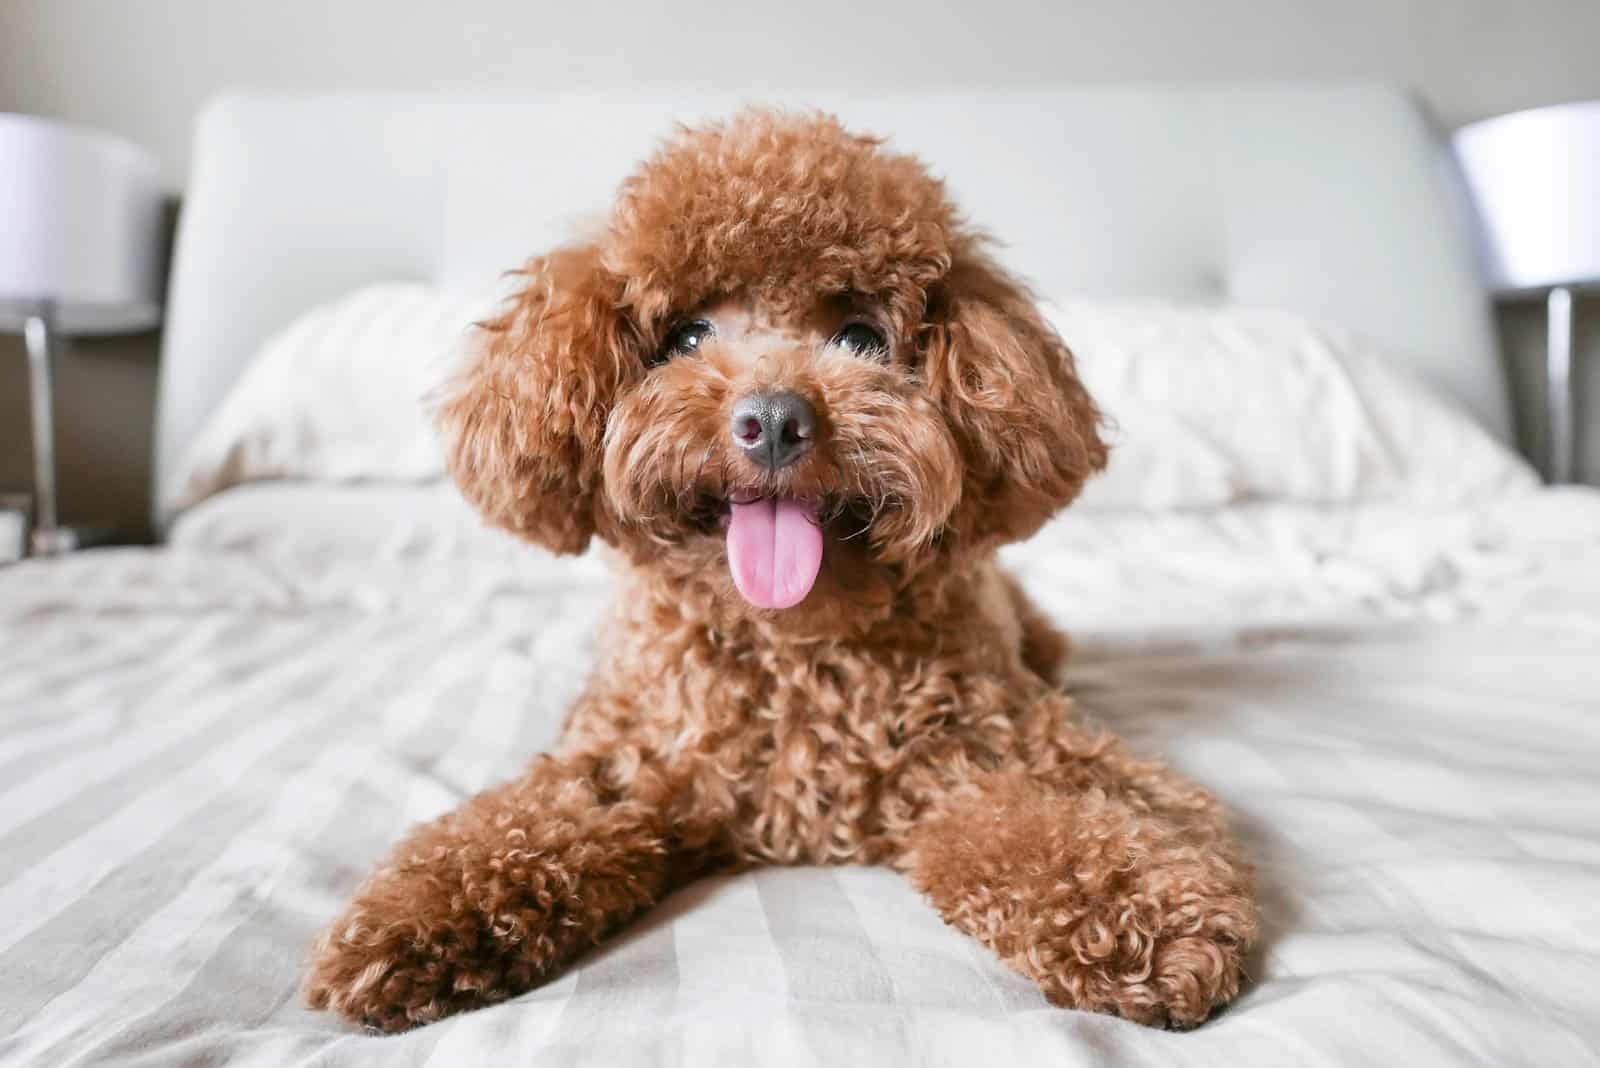 Poodle puppy is lying on the bed